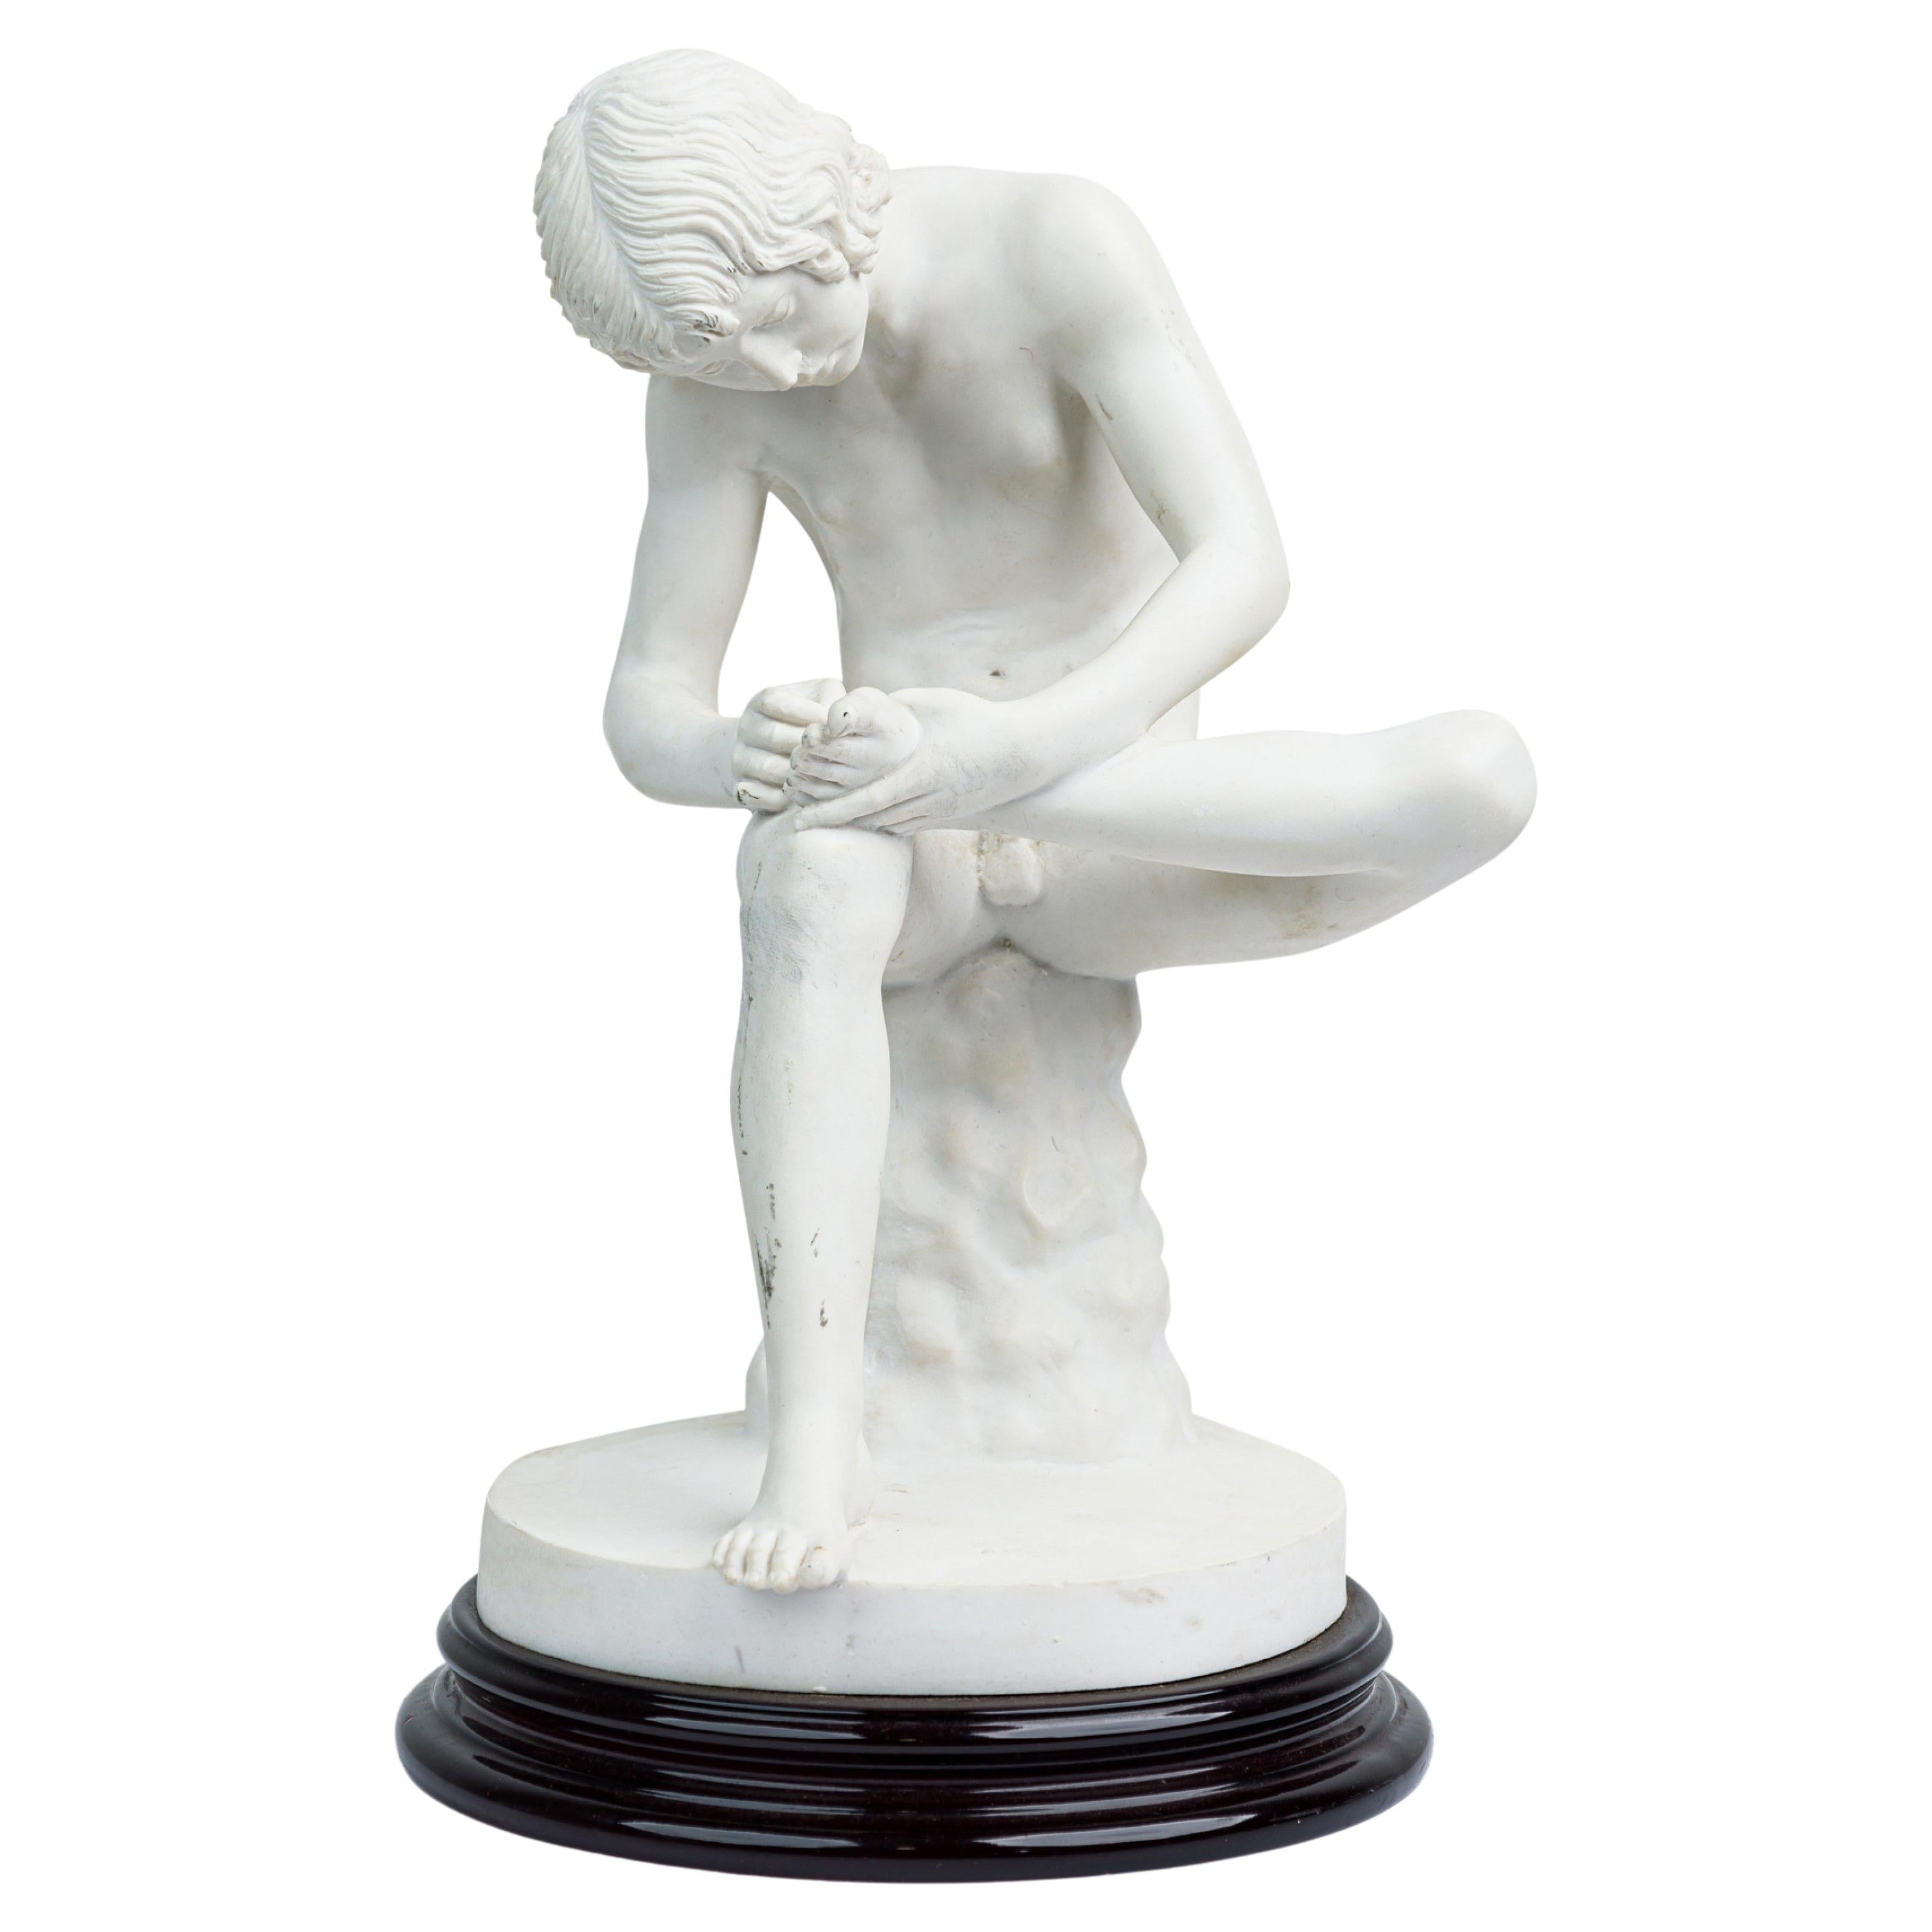 Italian White Porcelain Small Statue Cast of "Boy w/ Thorn" by Salterini For Sale